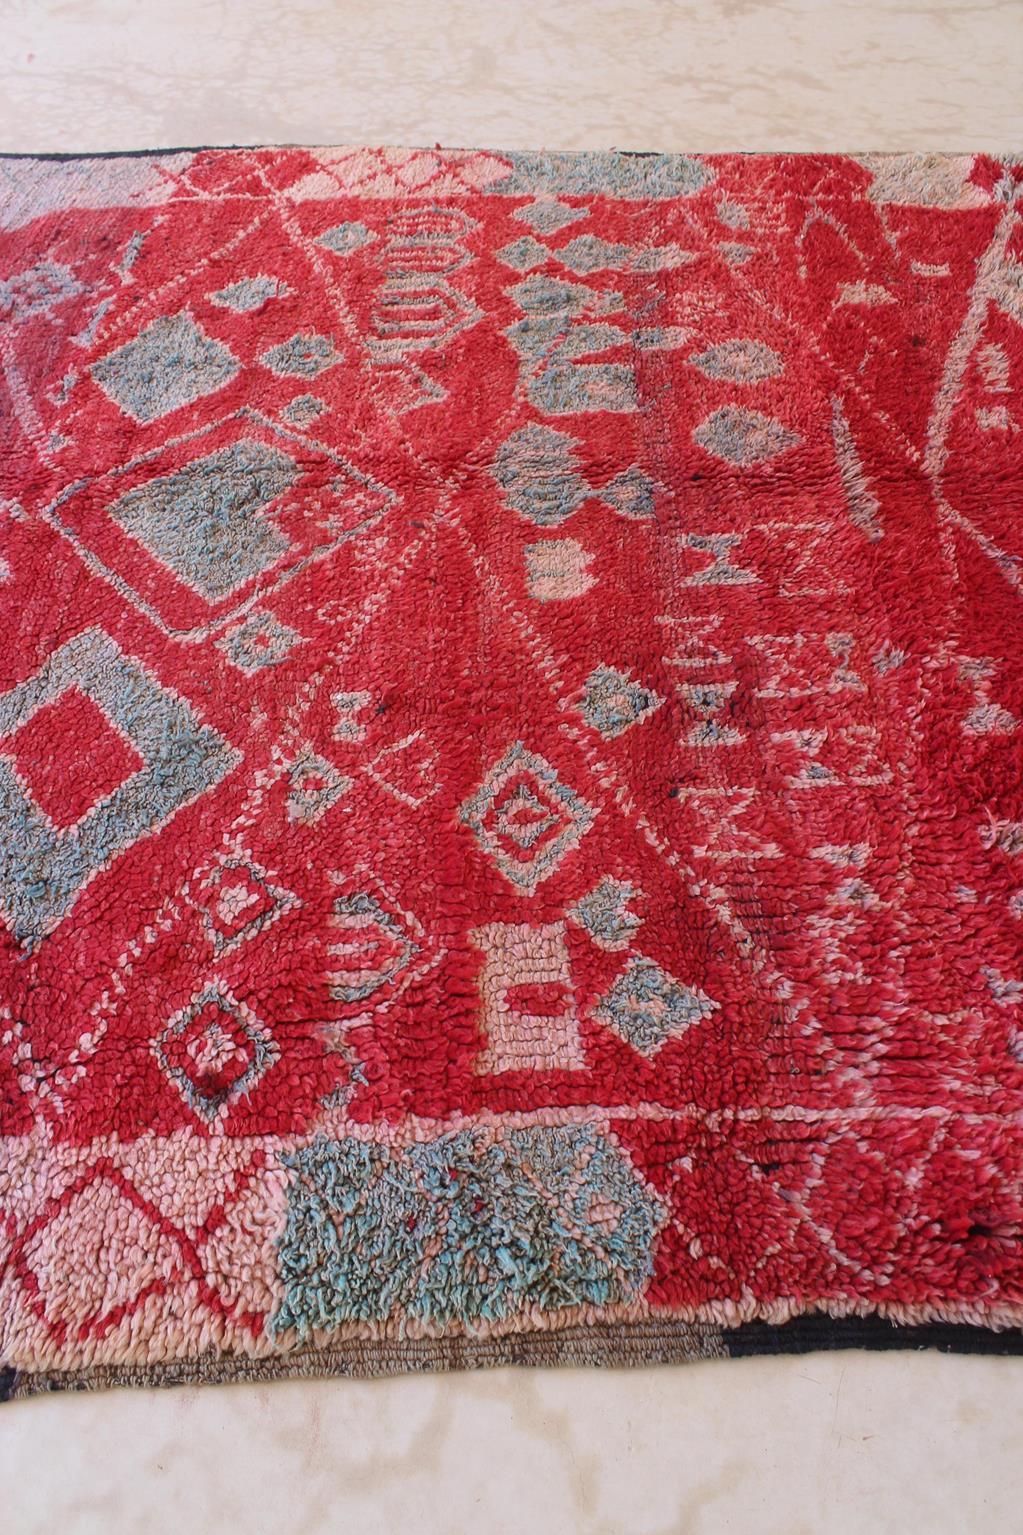 Vintage Moroccan Zayane rug - Red/green - 7x12feet / 213x365cm For Sale 2